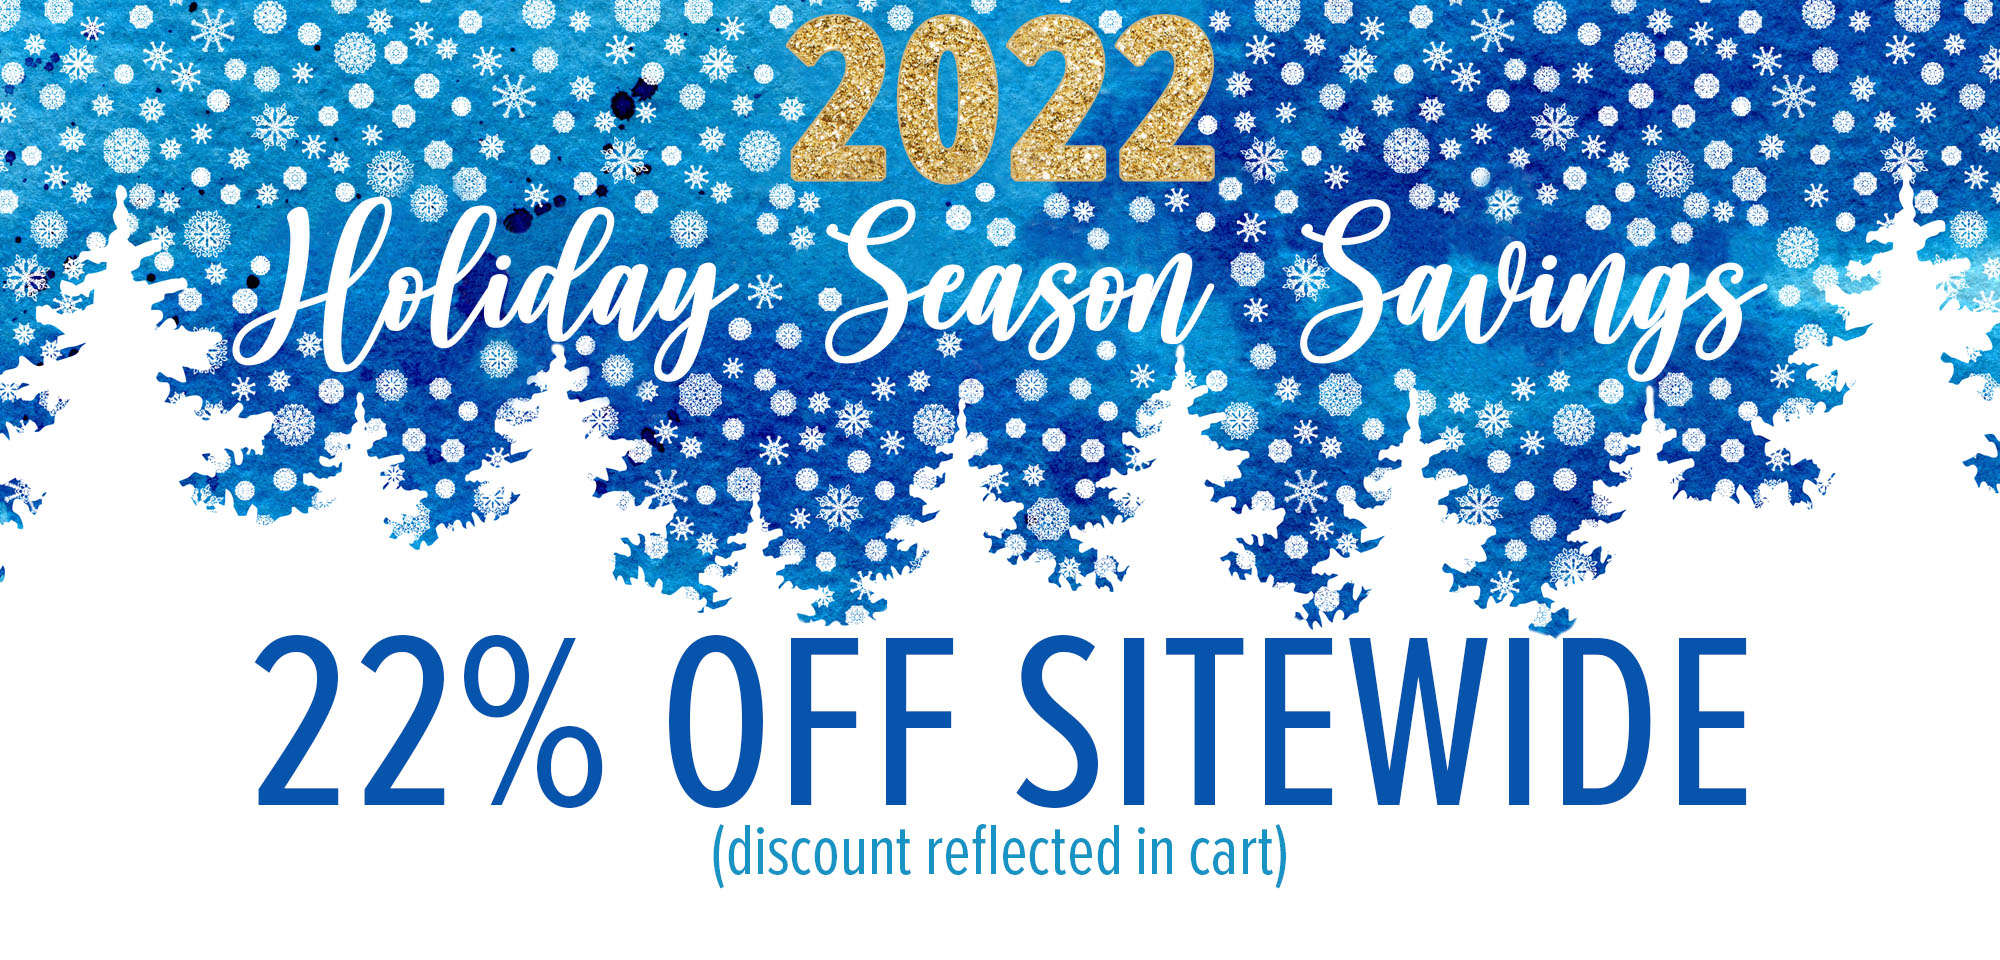 2022 Holiday Season Savings - 22 percent off sitewide - discount reflected in cart.